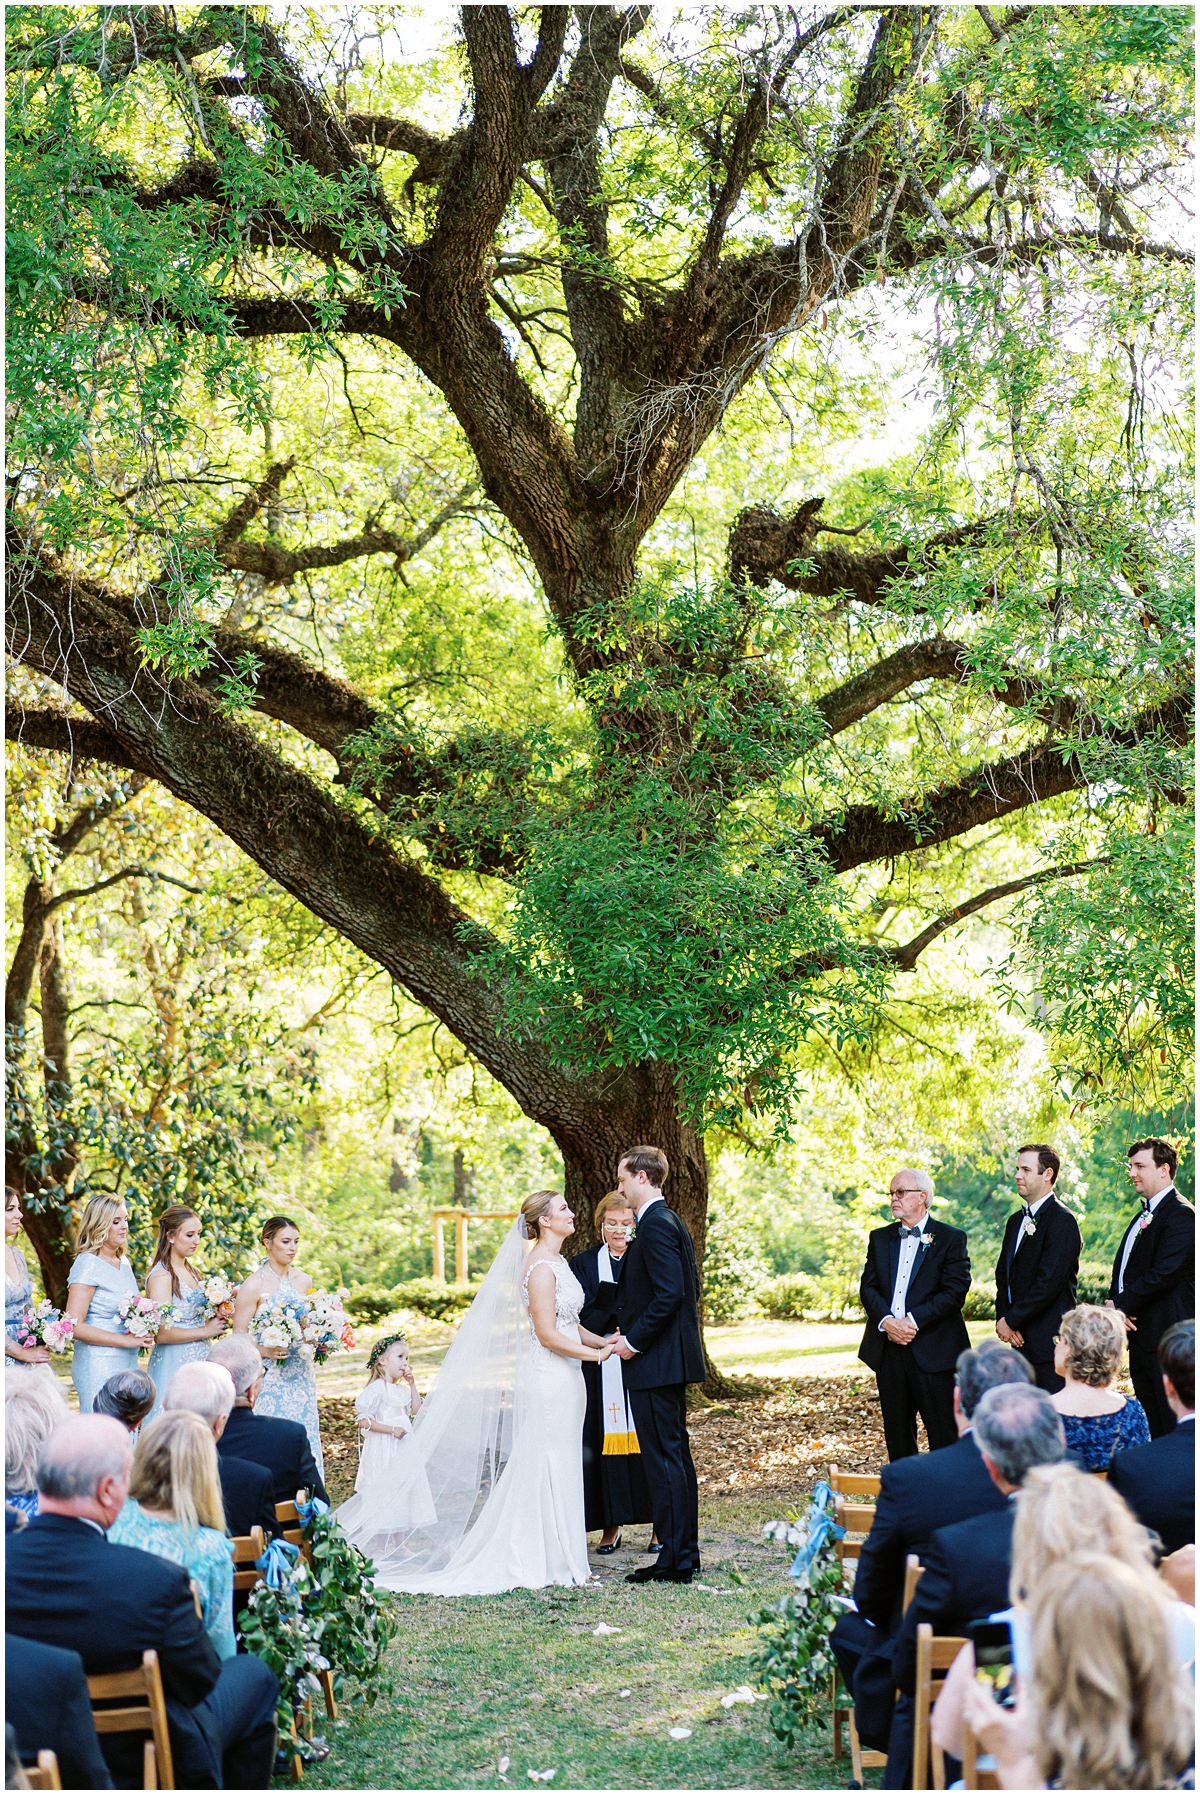 Wavering Place outdoor ceremony under the trees